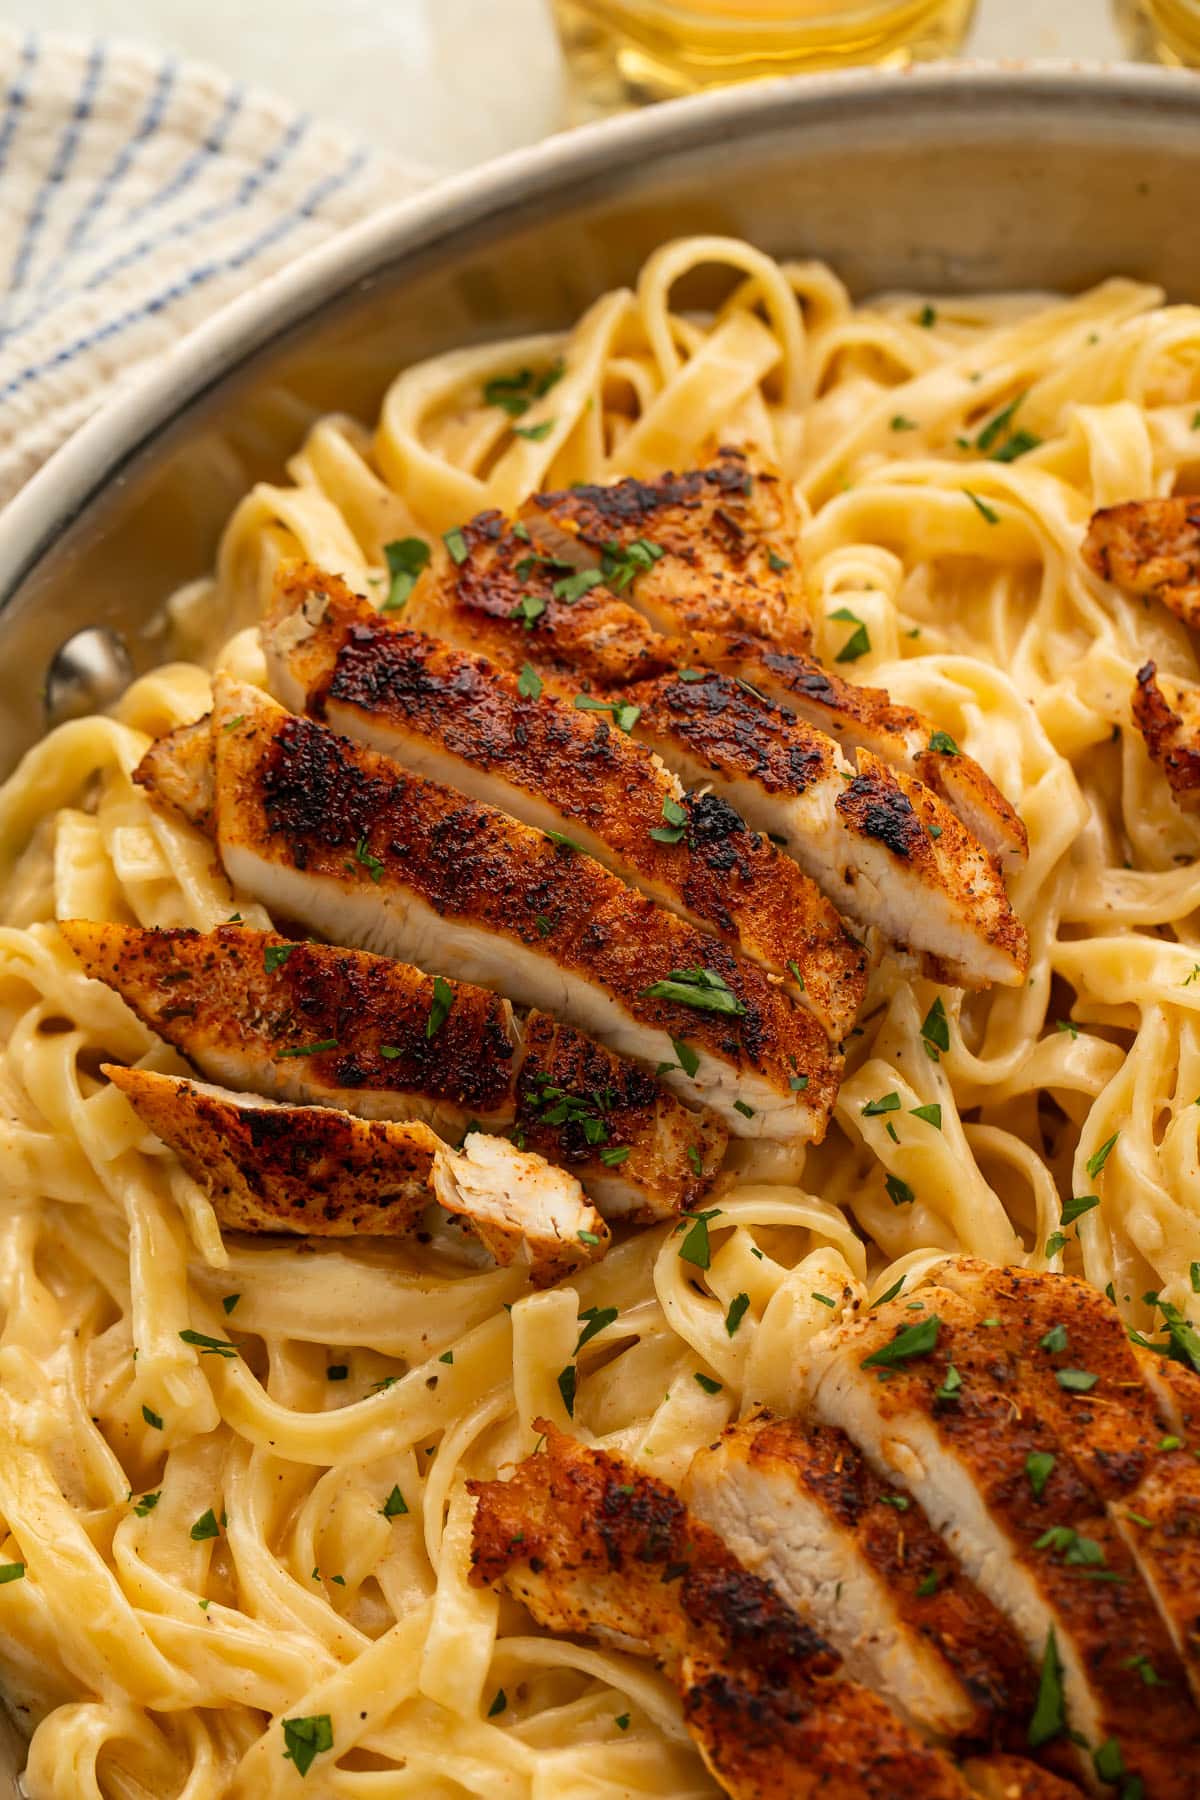 A skillet of fettucine pasta with alfredo sauce and blackened chicken breasts.